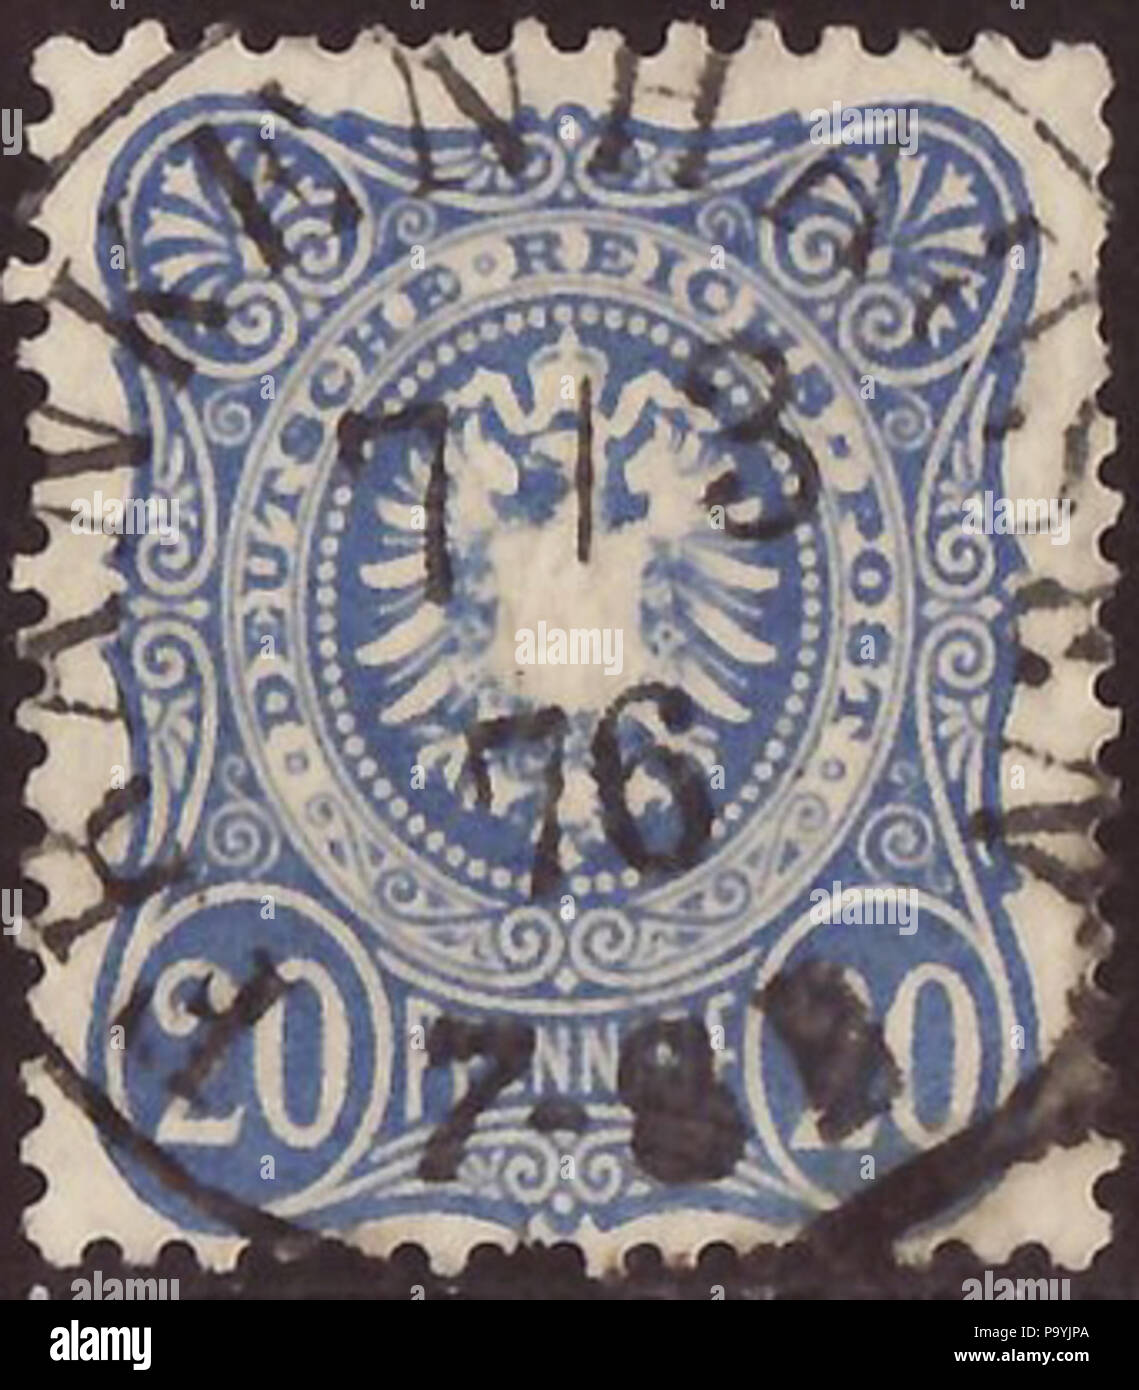 . Stamp of the German Empire; 1875; definitive stamp of the issue of 1875 after introduction of the new Mark-currency; currency inscription 'PFENNIGE' (with '...E'); postmarked in Frankenhausen (Thuringia, contemporary: Bad Frankenhausen), 1876 Stamp: Michel: No. 34; Yvert & Tellier: No. 33 (DR); Scott: No. 32 (DE) Color: ultramarine to blue Watermark: none Nominal value: 20 Pfennige Postal validity: from 1 January 1875 until 31 January 1891 Postmark: Frankenhausen (Thuringia, contemporary 'Bad Frankenhausen'), 7 March 1876 (single-circle postmark with 26 mm outer circle) . 1 January 1975 (fir Stock Photo